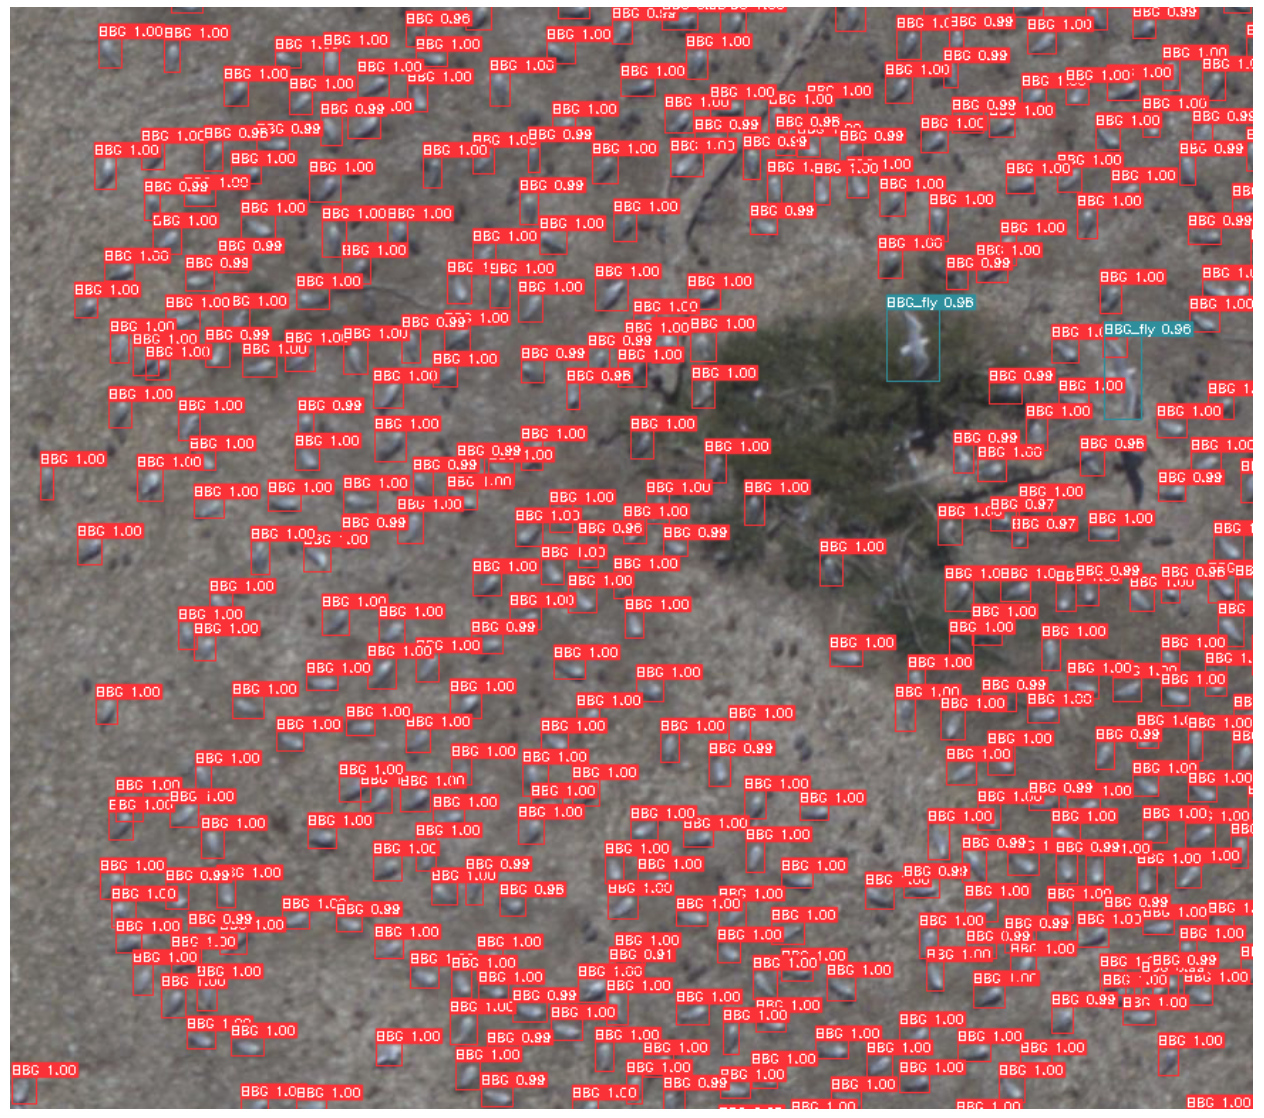 Image shows a subset of a large aerial image of a Black-billed gull colony, with detections from the trained Faster RCNN model.